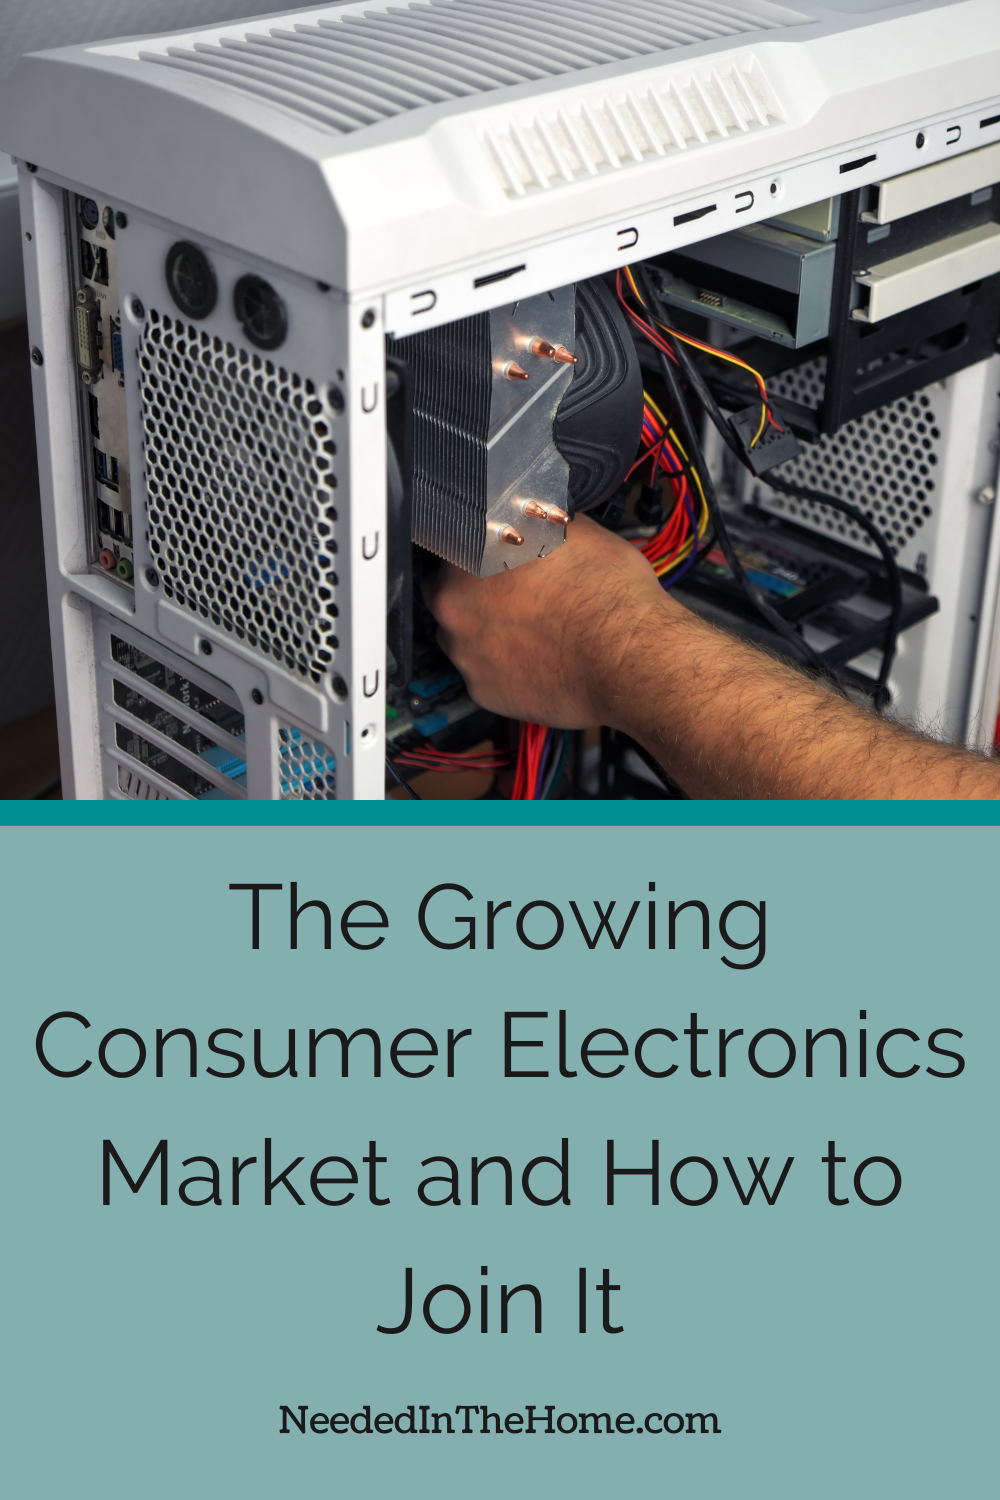 pinterest pin description the growing consumer electronics market and how to join it mans hand building a computer neededinthehome